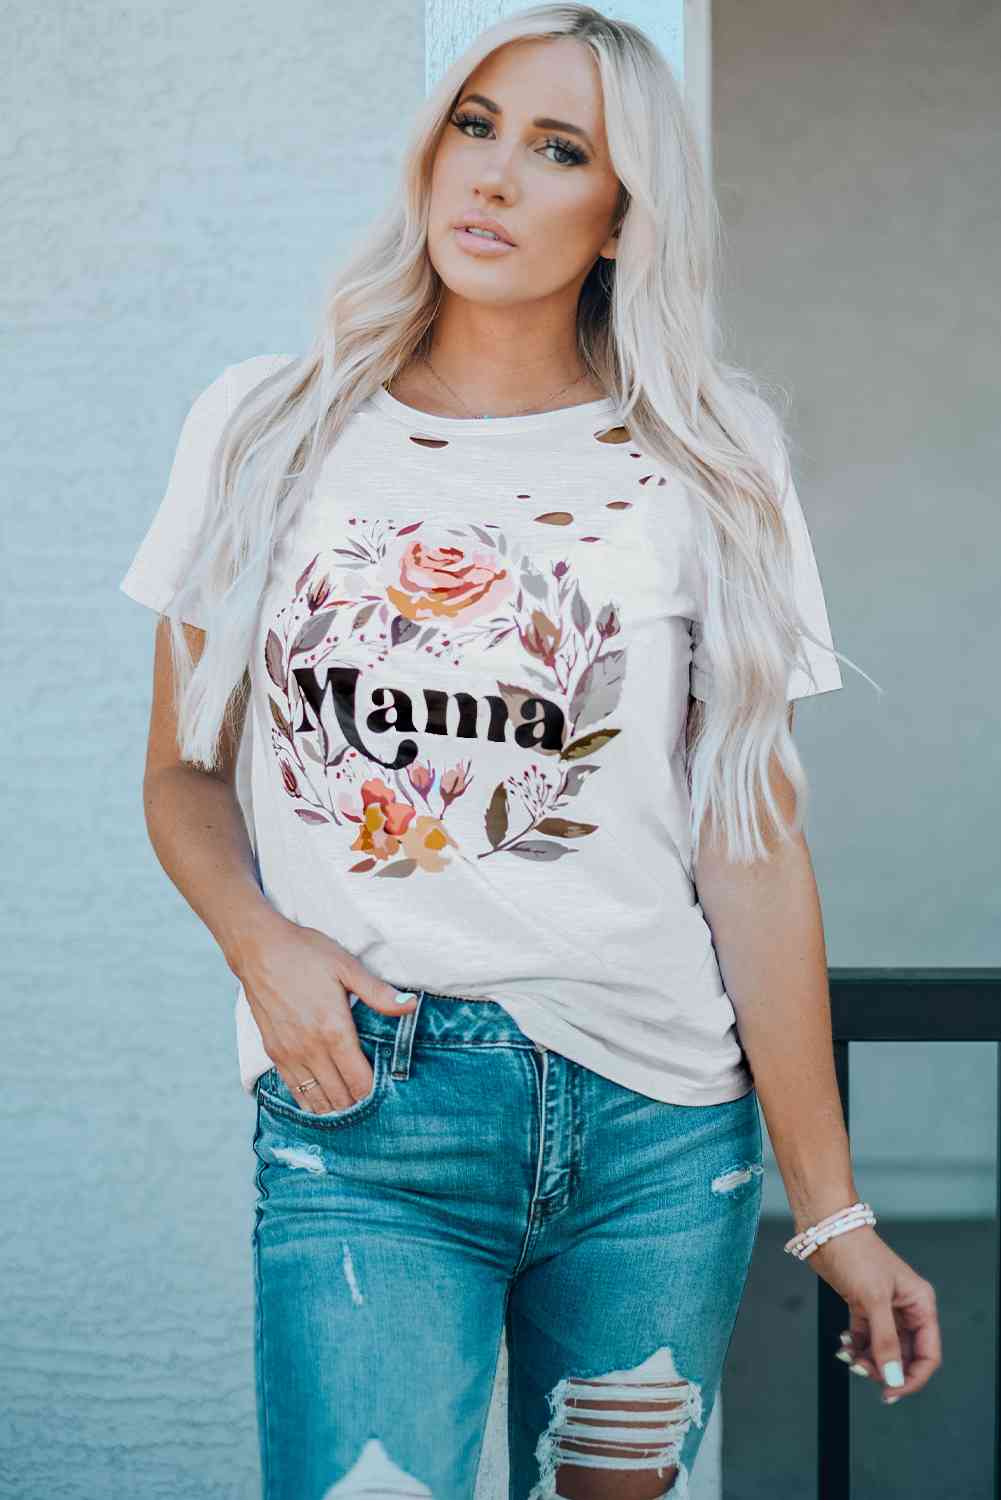 BM TEE A MAMA Floral Graphic Distressed Tee